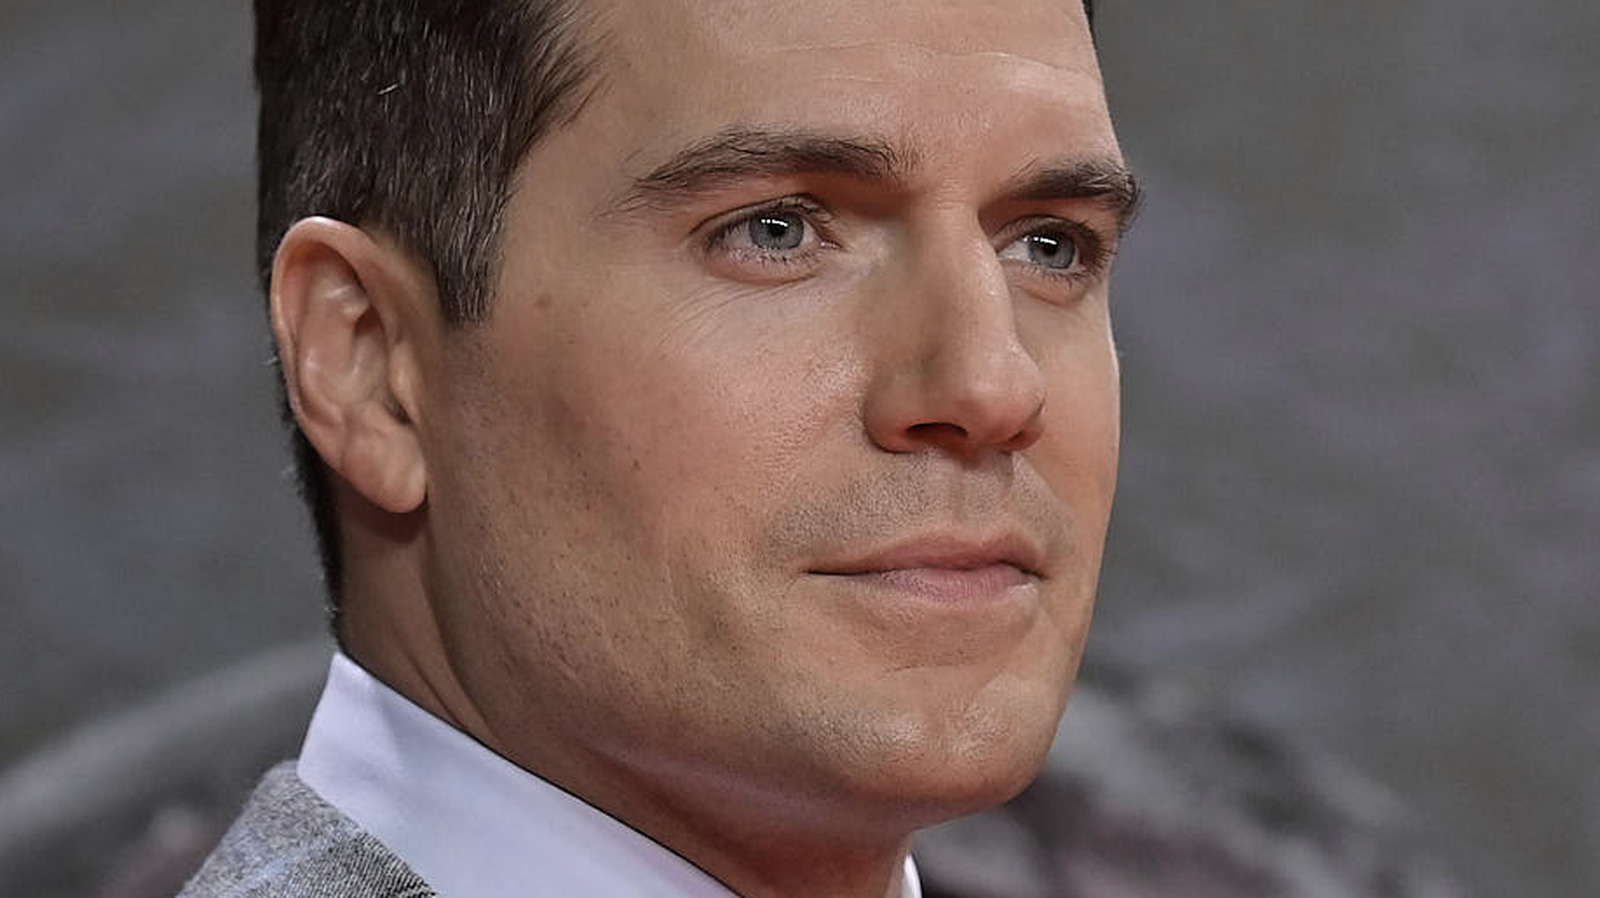 The Witcher Fandom Makes Their Voice Heard with Petition to Keep Henry Cavill As Geralt